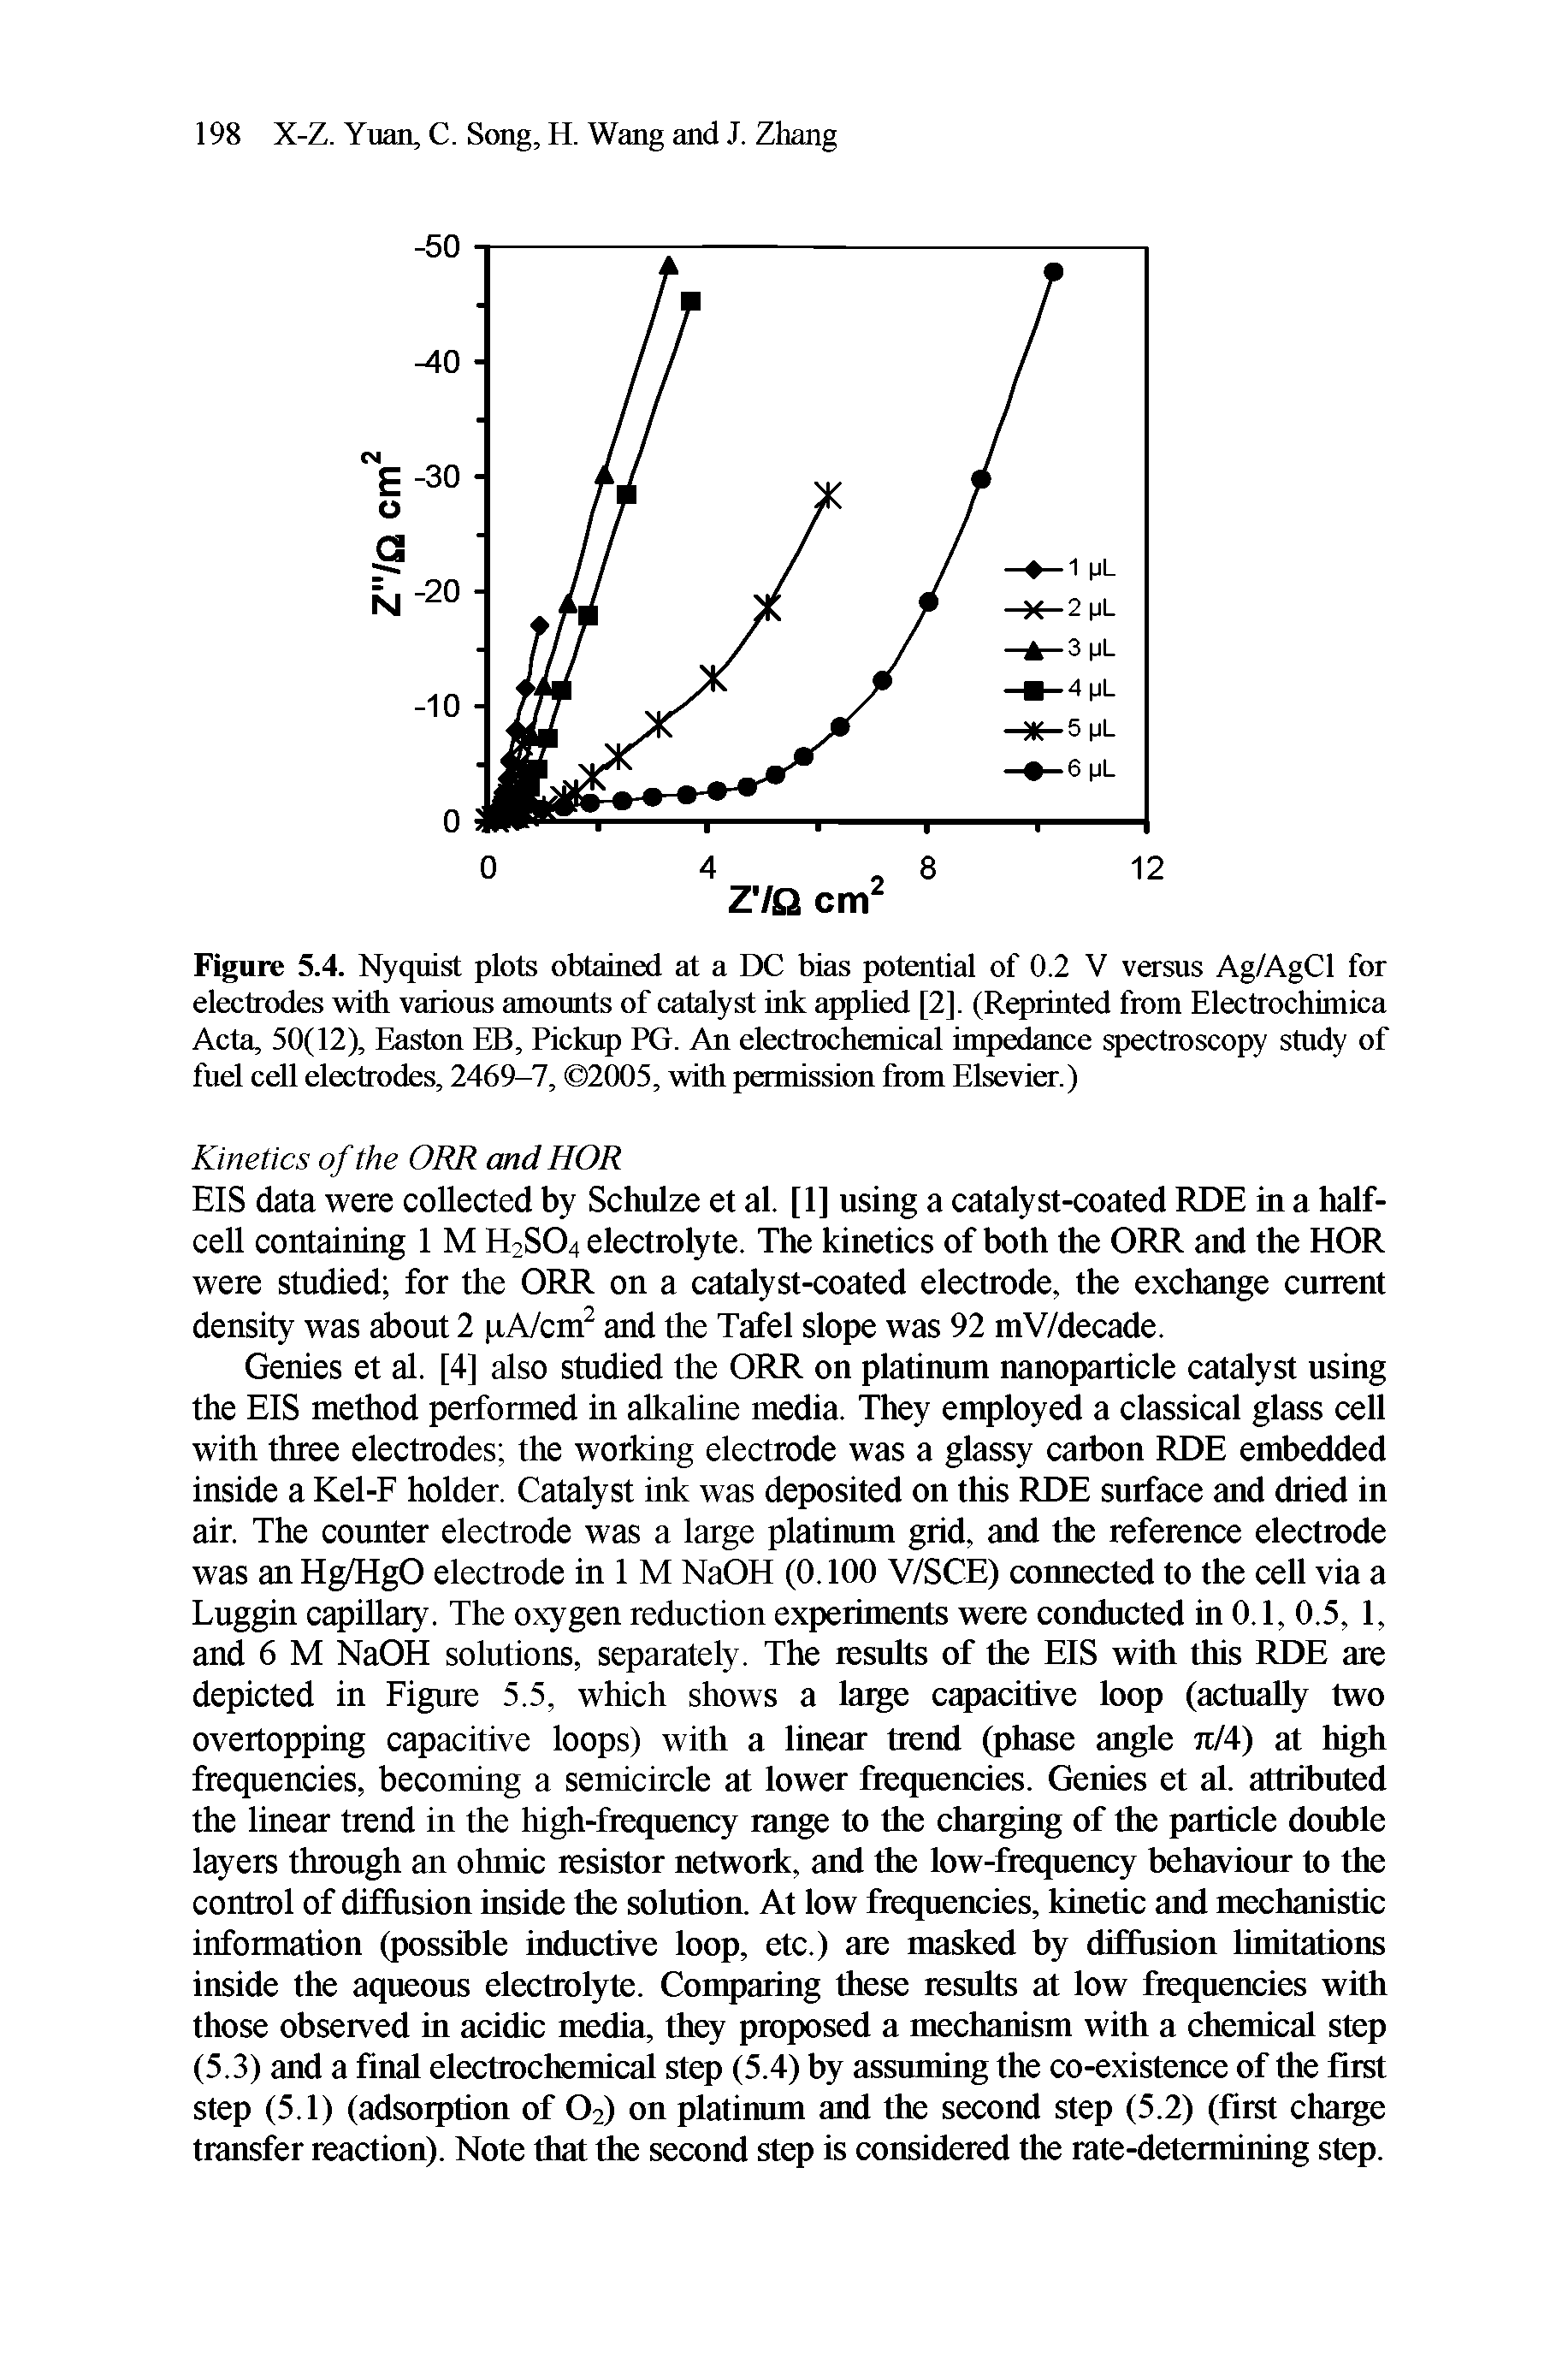 Figure 5.4. Nyquist plots obtained at a DC bias potential of 0.2 V versus Ag/AgCl for electrodes with various amounts of catalyst ink applied [2], (Reprinted from Electrochimica Acta, 50(12), Easton EB, Pickup PG. An electrochemical impedance spectroscopy study of fuel cell electrodes, 2469-7, 2005, with permission from Elsevier.)...